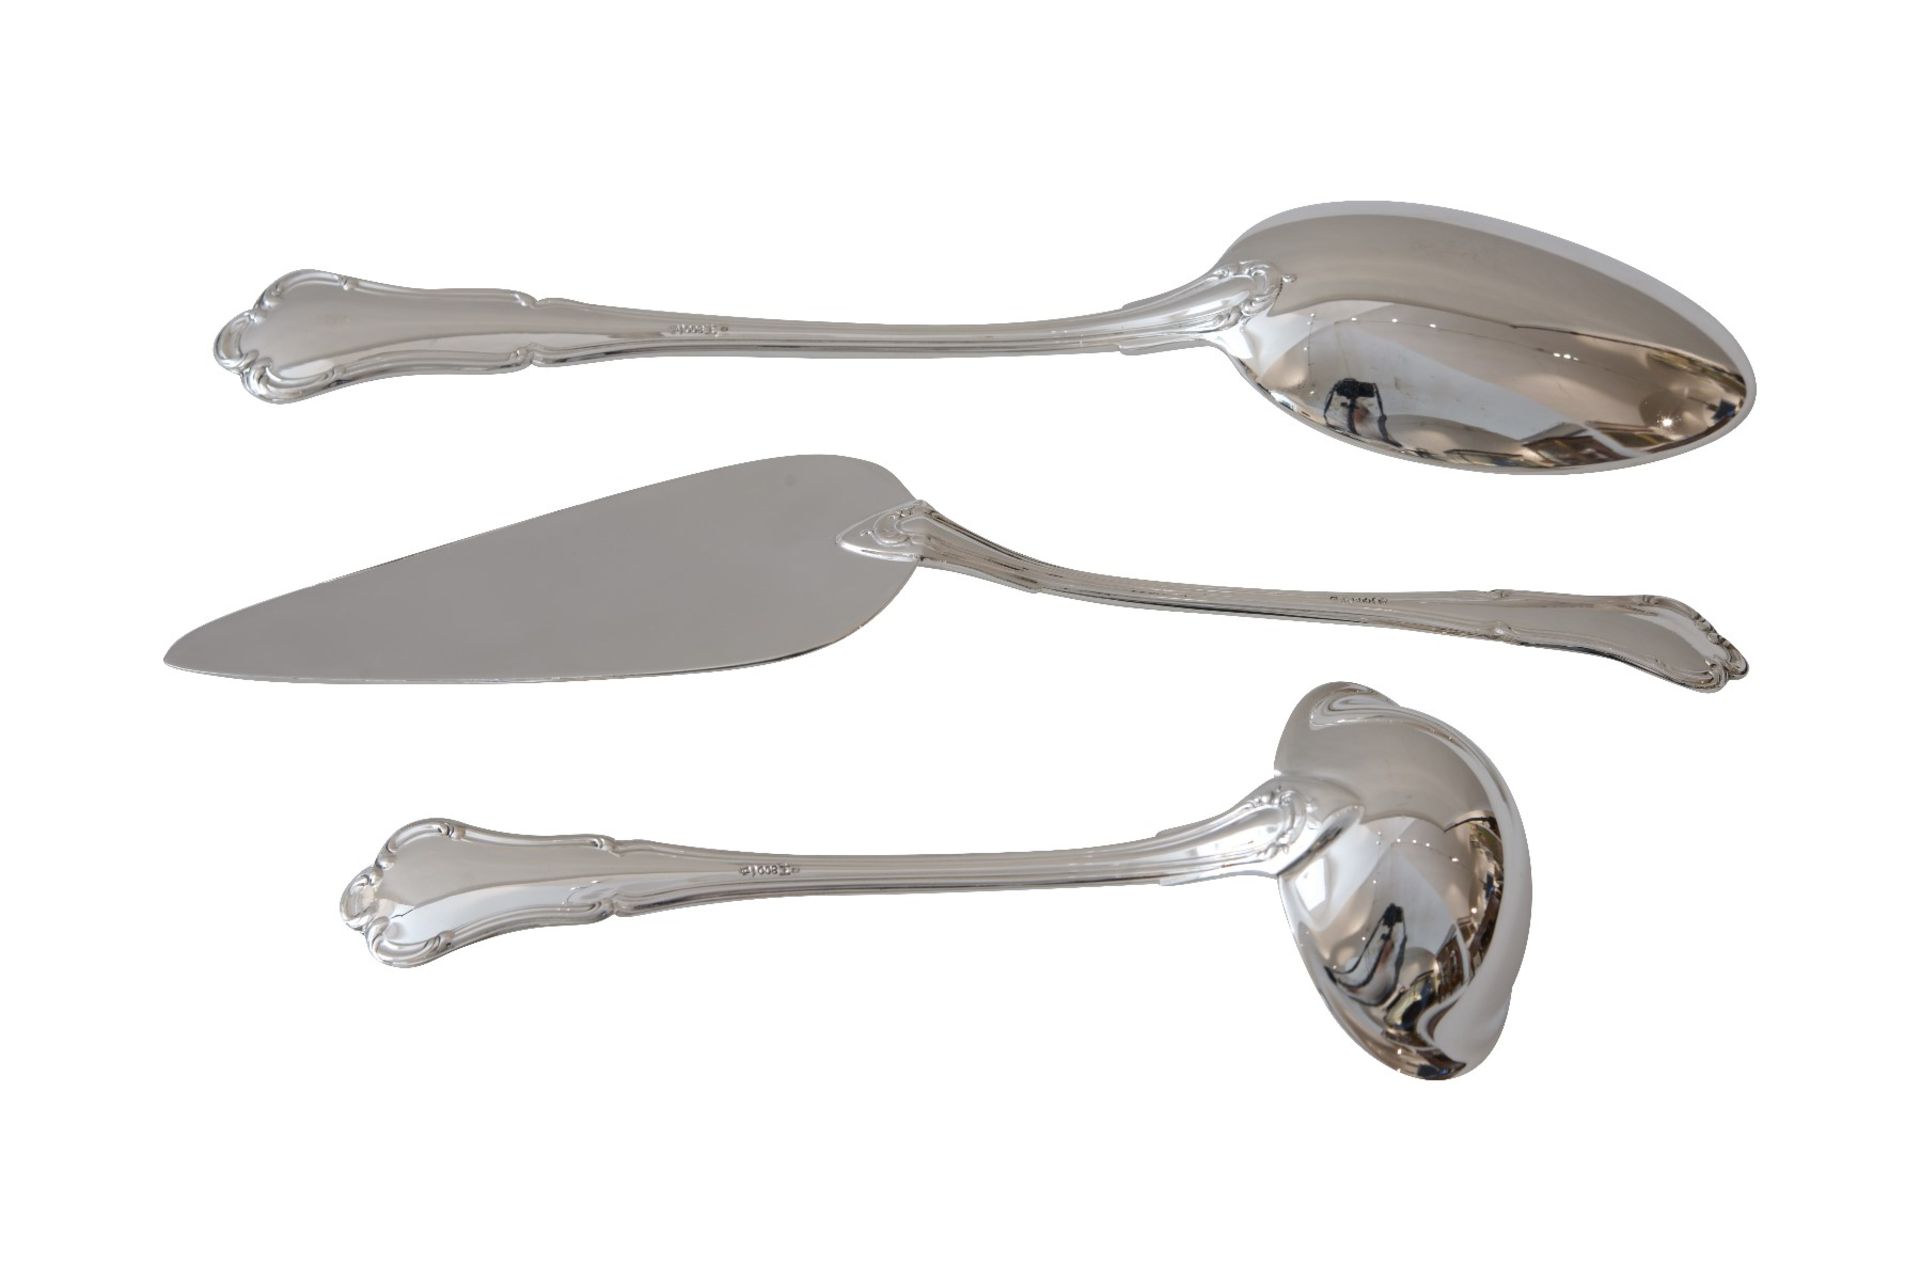 Serving cutlery - Image 2 of 3